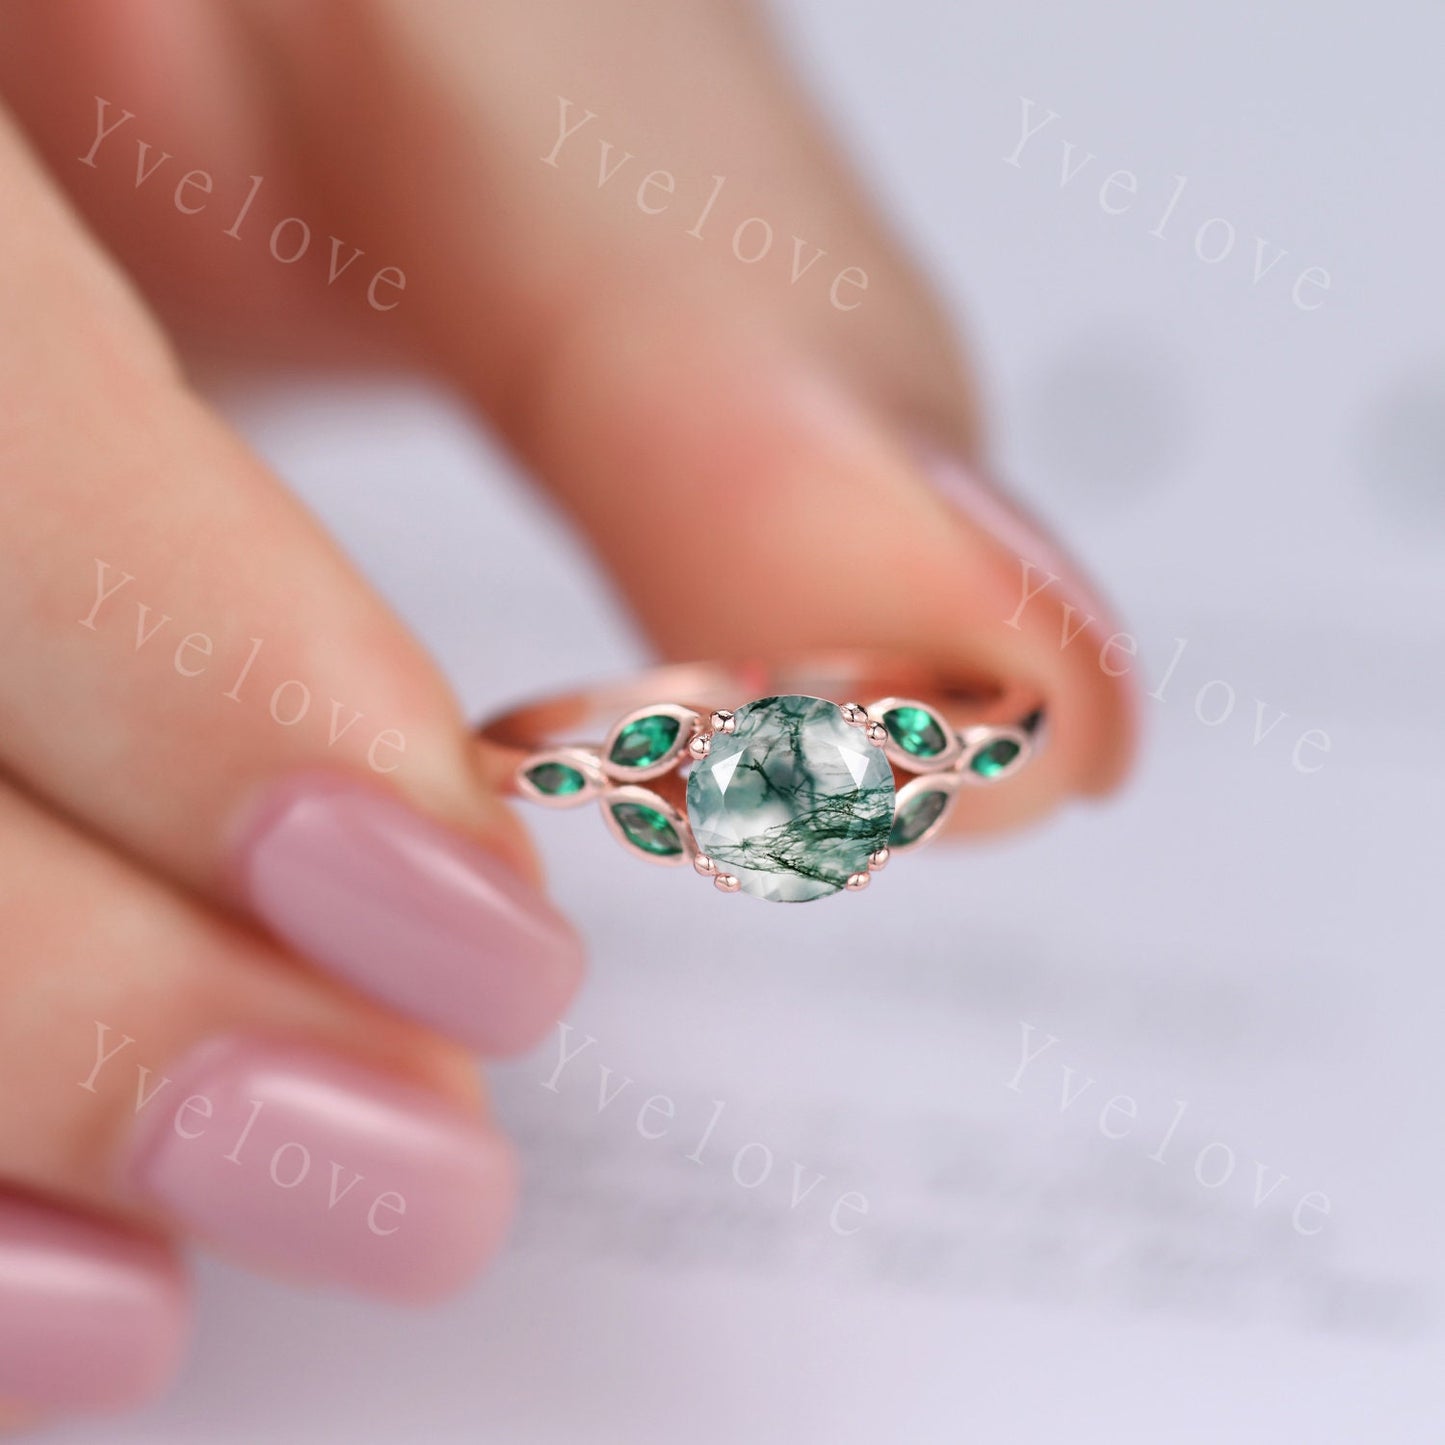 7mm round moss agate engagement ring leaf marquise emerald stones vintage moss agate wedding ring  floral ring promise  anniversary gift